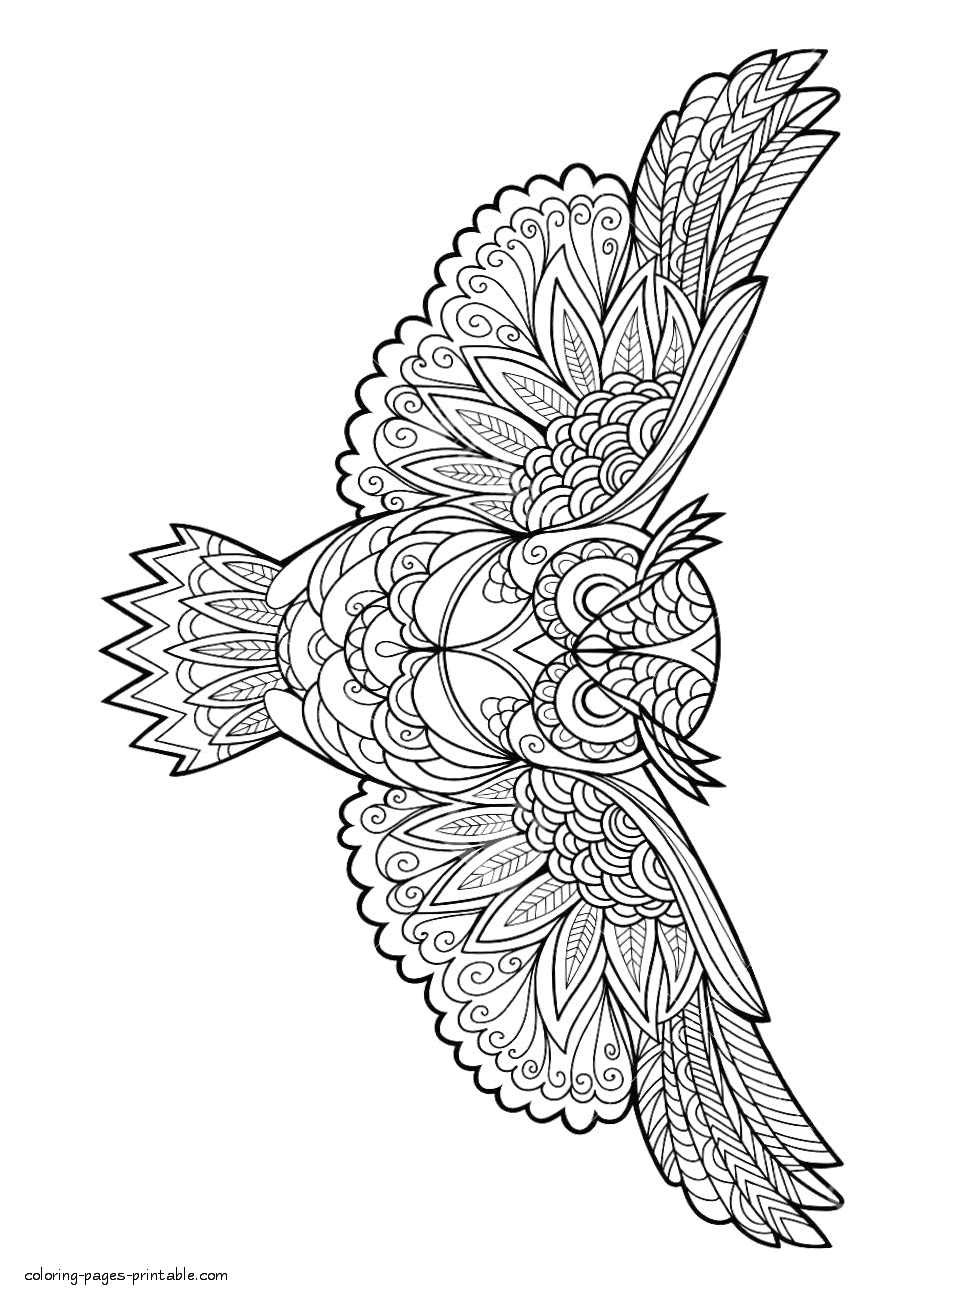 Bird Coloring Book For Adults || COLORING-PAGES-PRINTABLE.COM